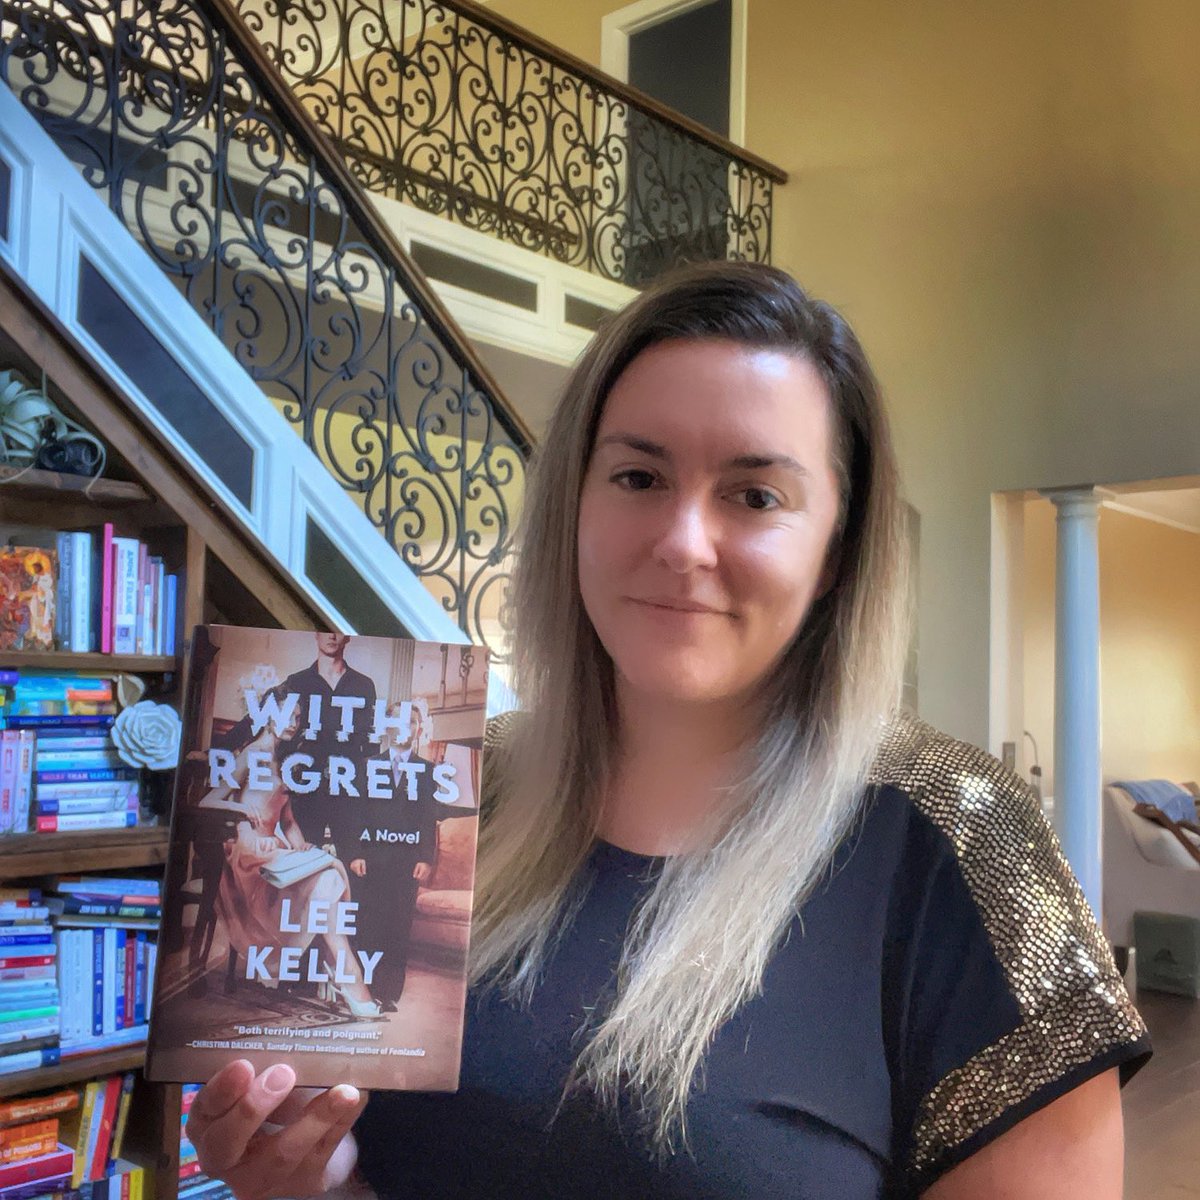 Just posted my review of new release With Regrets on openmypages.com - thanks to @BookSparks for including me on this tour #booktwt #booktwitter #booksparks #frc2023